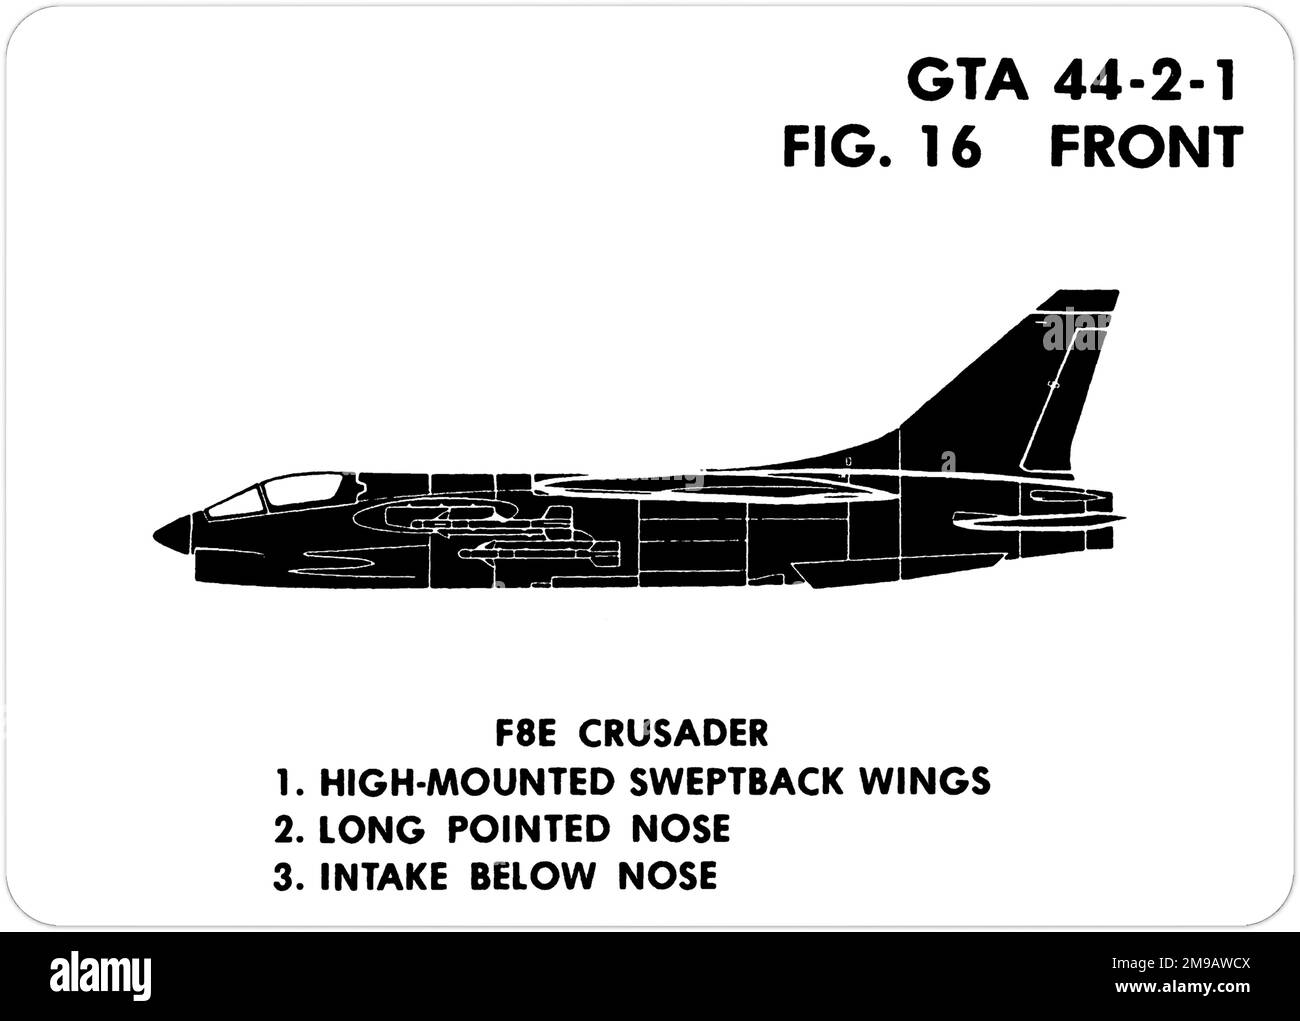 Vought F-8E Crusader (F8U-2 pre 1962). This is one of the series of Graphics Training Aids (GTA) used by the United States Army to train their personnel to recognize friendly and hostile aircraft. This particular set, GTA 44-2-1, was issued in July1977. The set features aircraft from: Canada, Italy, United Kingdom, United States, and the USSR. Stock Photo